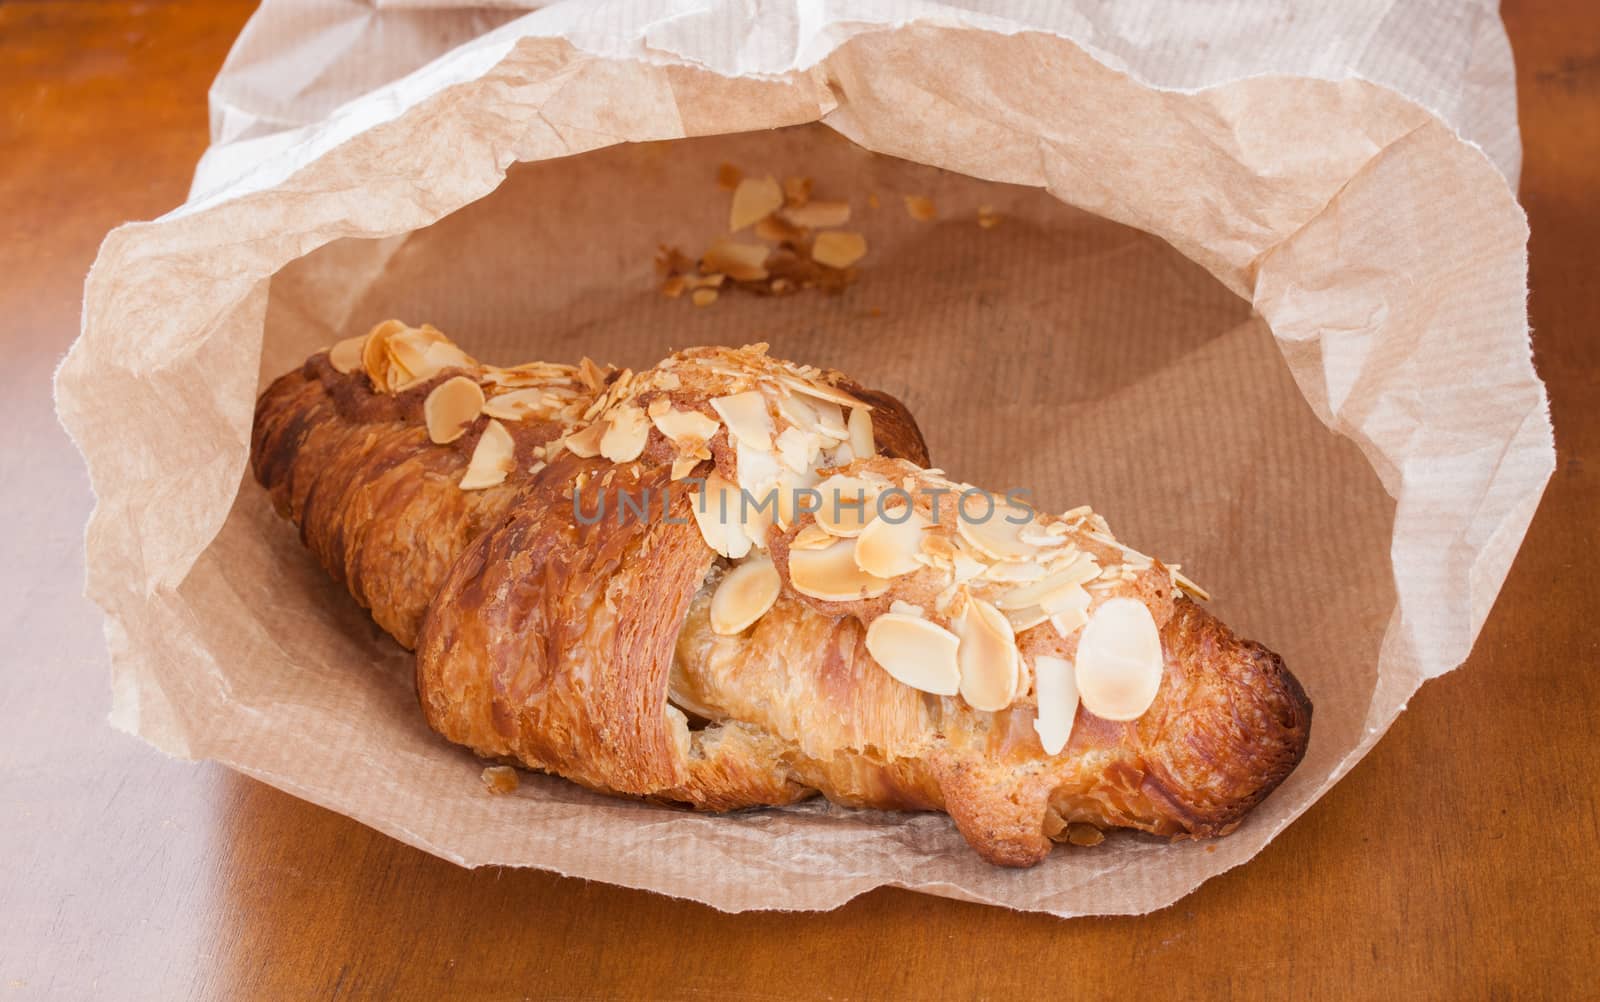 Fresh delicious almond crescent from bakery in a brown paper bag